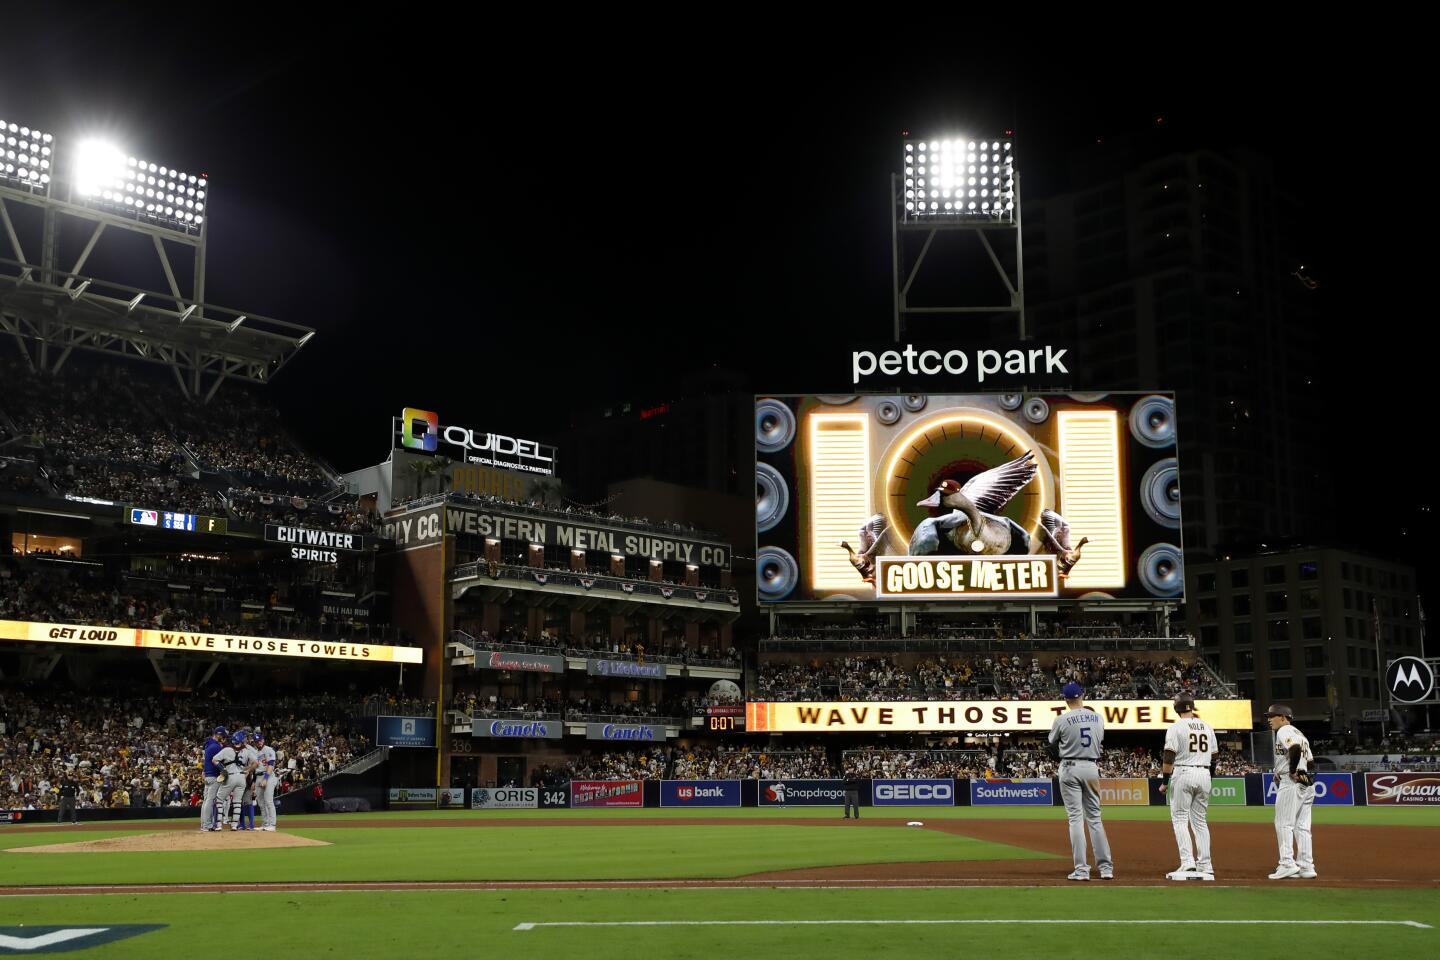 NLDS Game 4: Dodgers at Padres – what you need to know